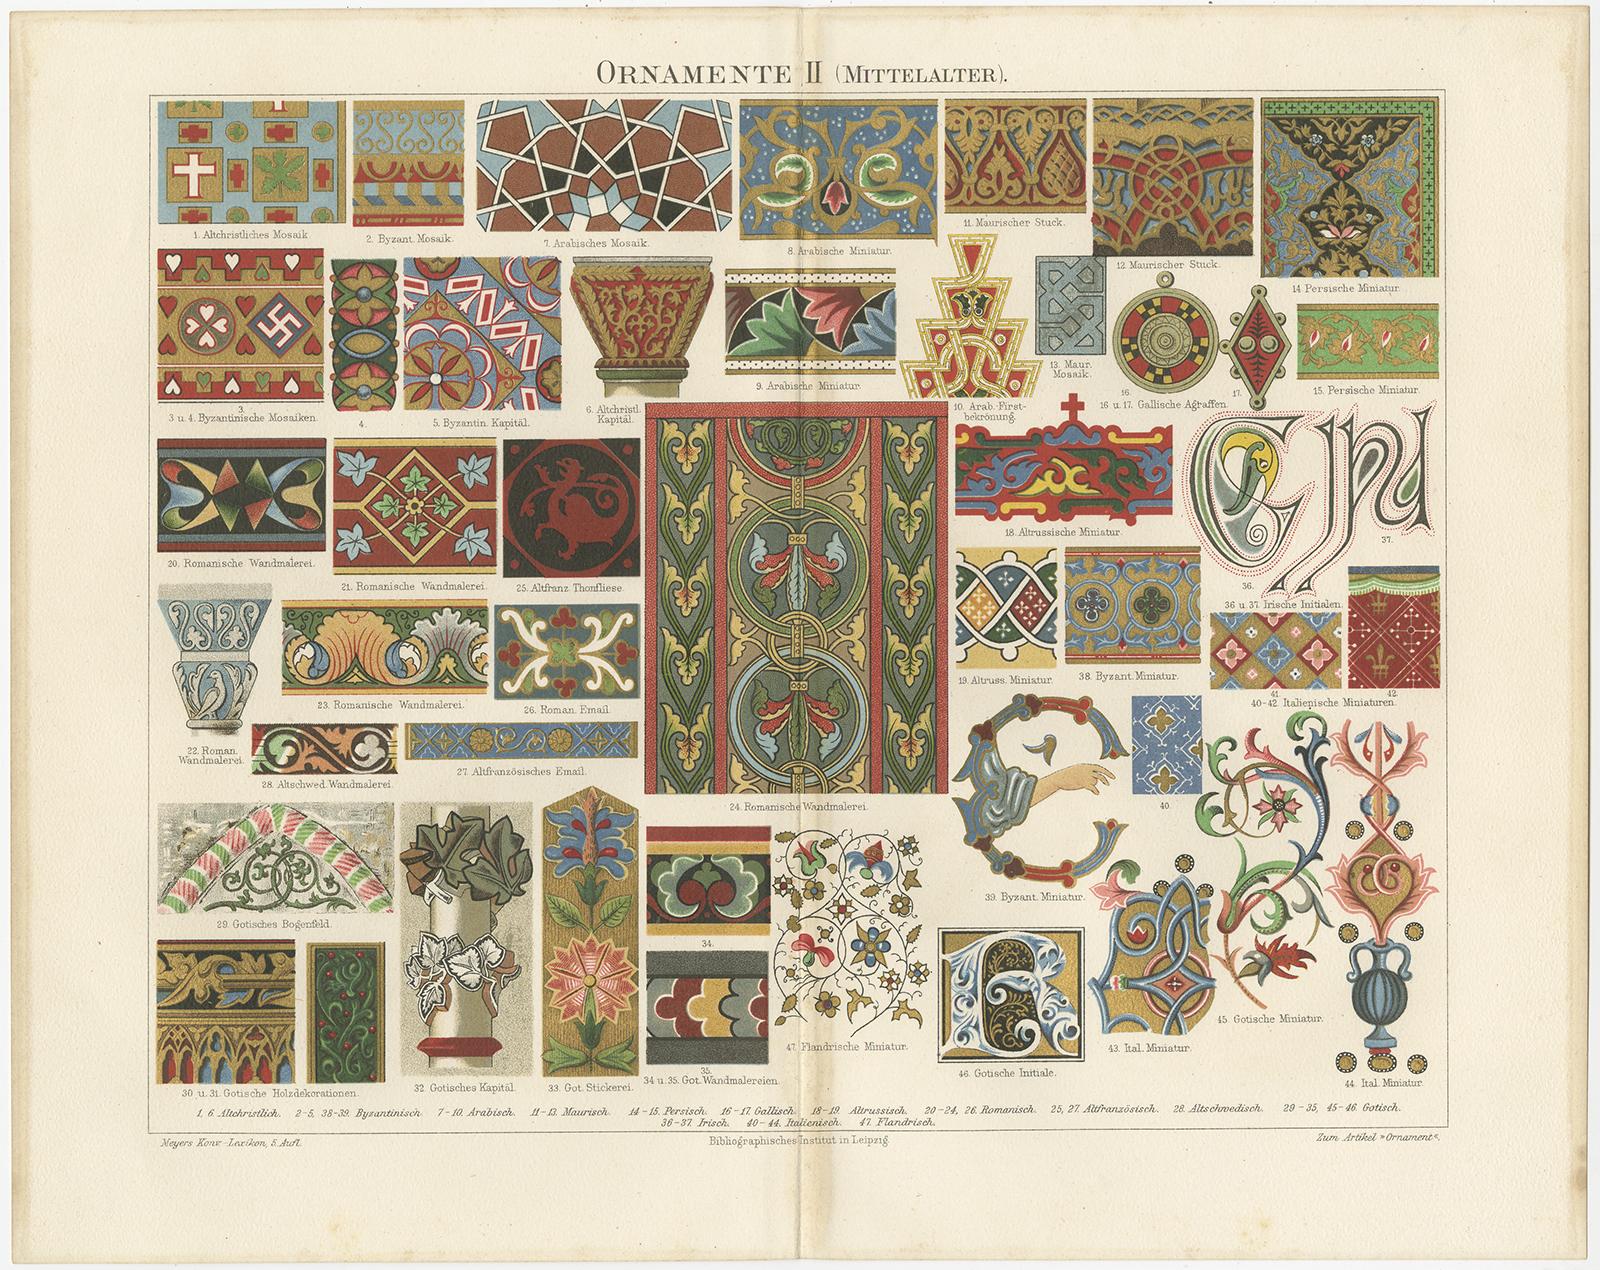 Set of four antique prints depicting various ornaments. This set includes ornaments of the Antiquity, Renaissance, Middle Ages, 17th century, 18th century and Asia. Originating from 'Meyers Konversations-Lexikon'. Meyers Konversations-Lexikon or